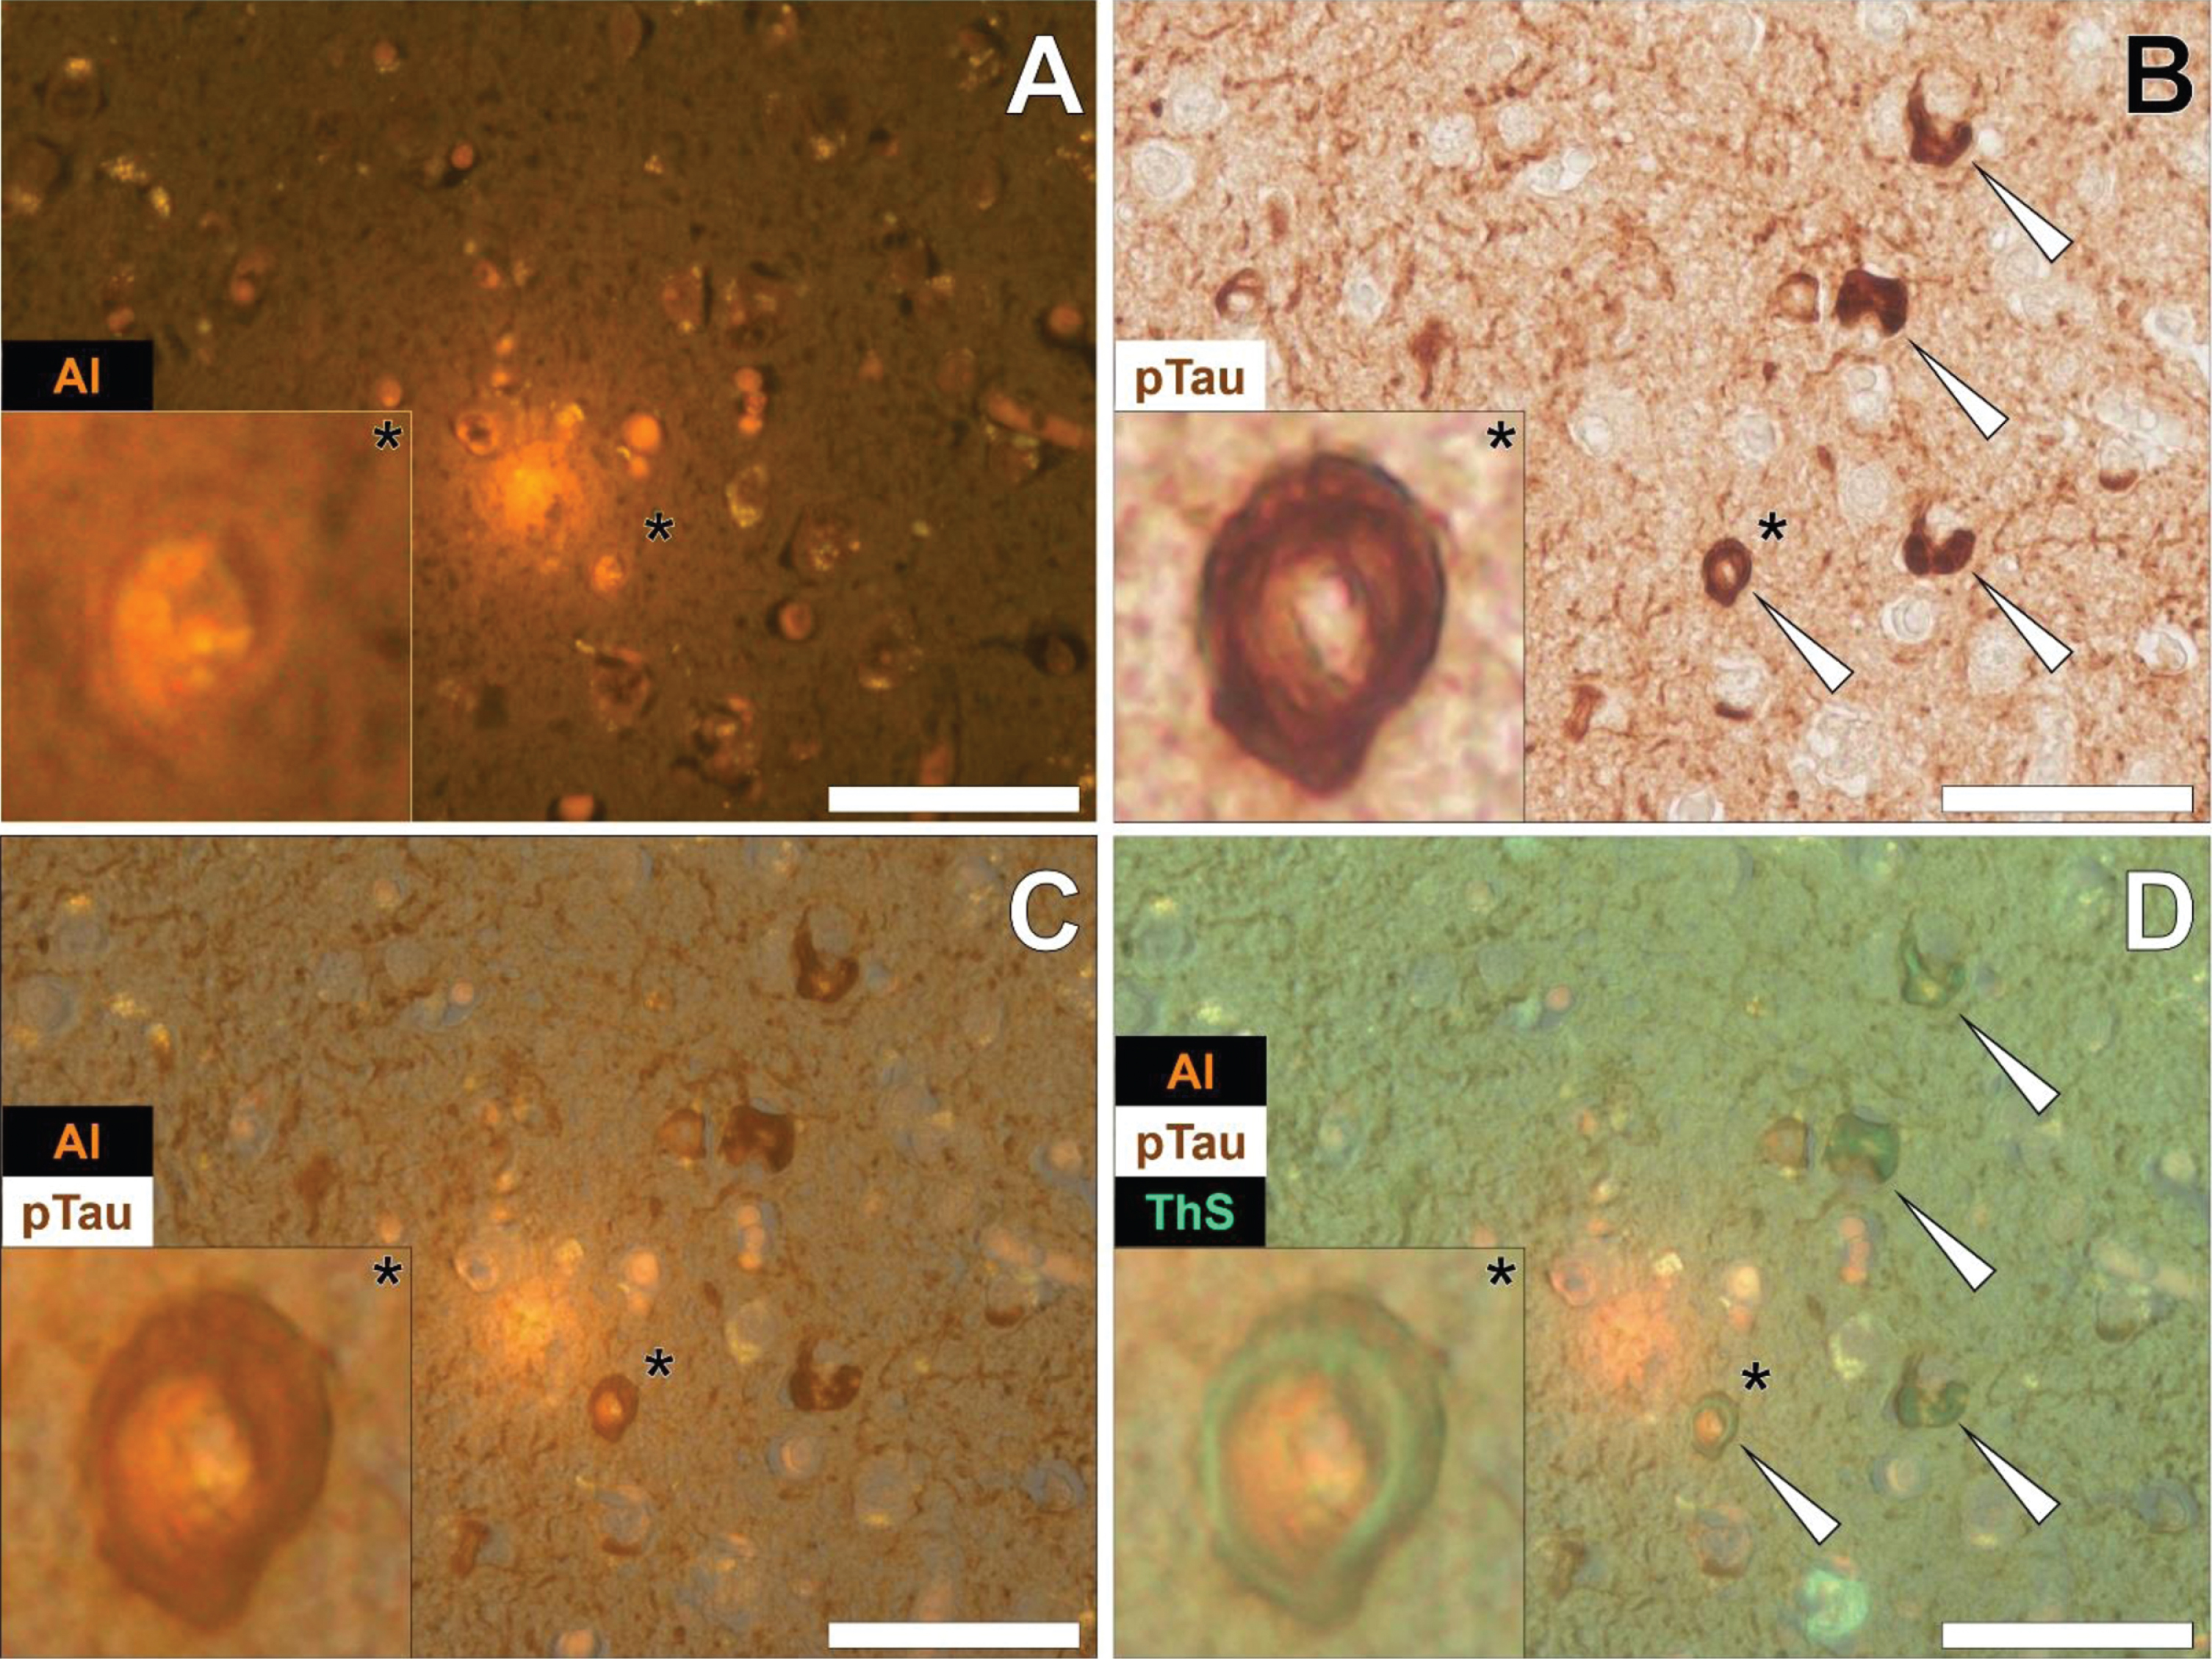 Neuronal cells loaded with aluminum in close proximity to extracellular aluminum in the temporal cortex of a 45-year-old female Colombian donor with familial Alzheimer’s disease. A) Intracellular aluminum (Al) in close proximity to aluminum-rich cellular debris (orange). B) AT8 immunoreactive phosphorylated tau (pTau) in neurons (arrows) located via DAB staining in the identical section (brown). C) Merging of lumogallion and brightfield channels depicting aluminum and pTau in the identical neuron. D) Overlay of thioflavin S fluorescence (green) highlighting NFTs of pTau. Asterisks denote magnified inserts. Figure adapted from [26] under CC license. Magnification: X 400, scale bars: 50μm.